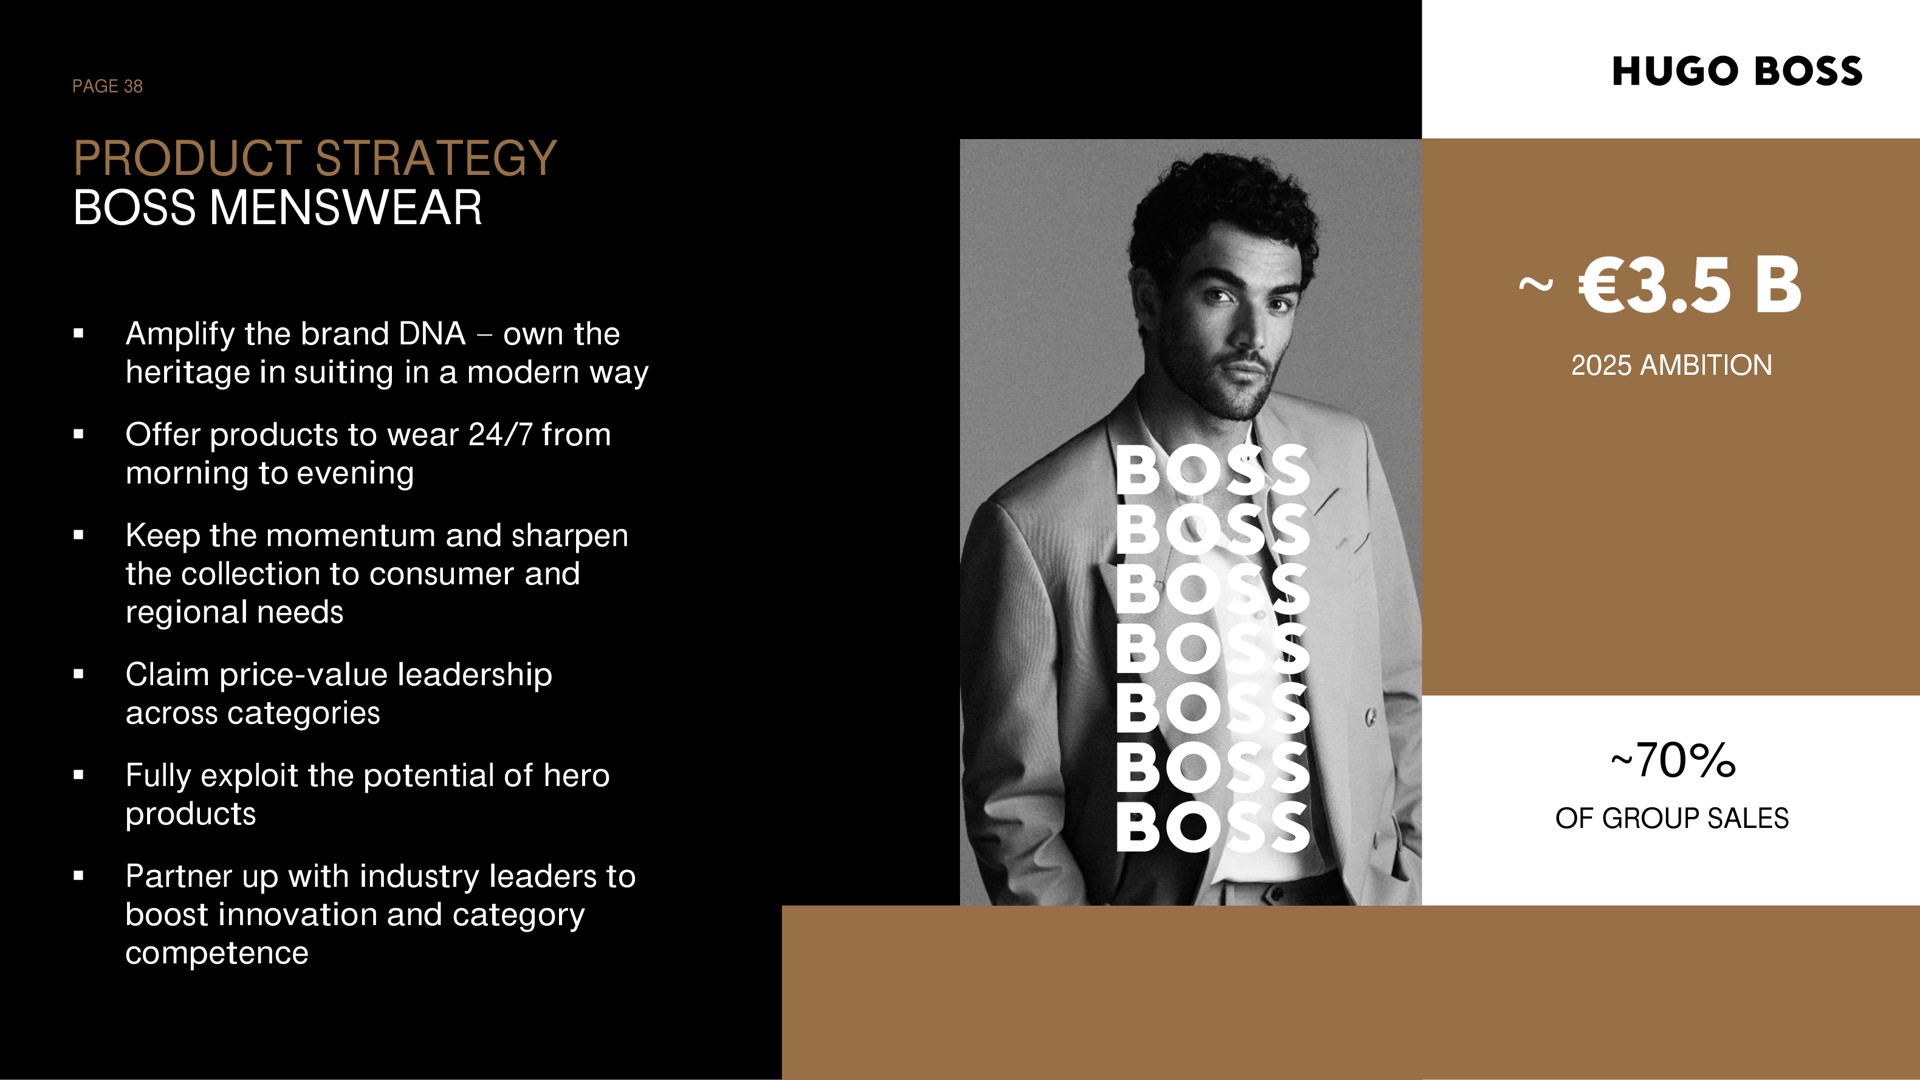 product strategy boss claim price value leadership across categories competence products of group sales my | Hugo Boss